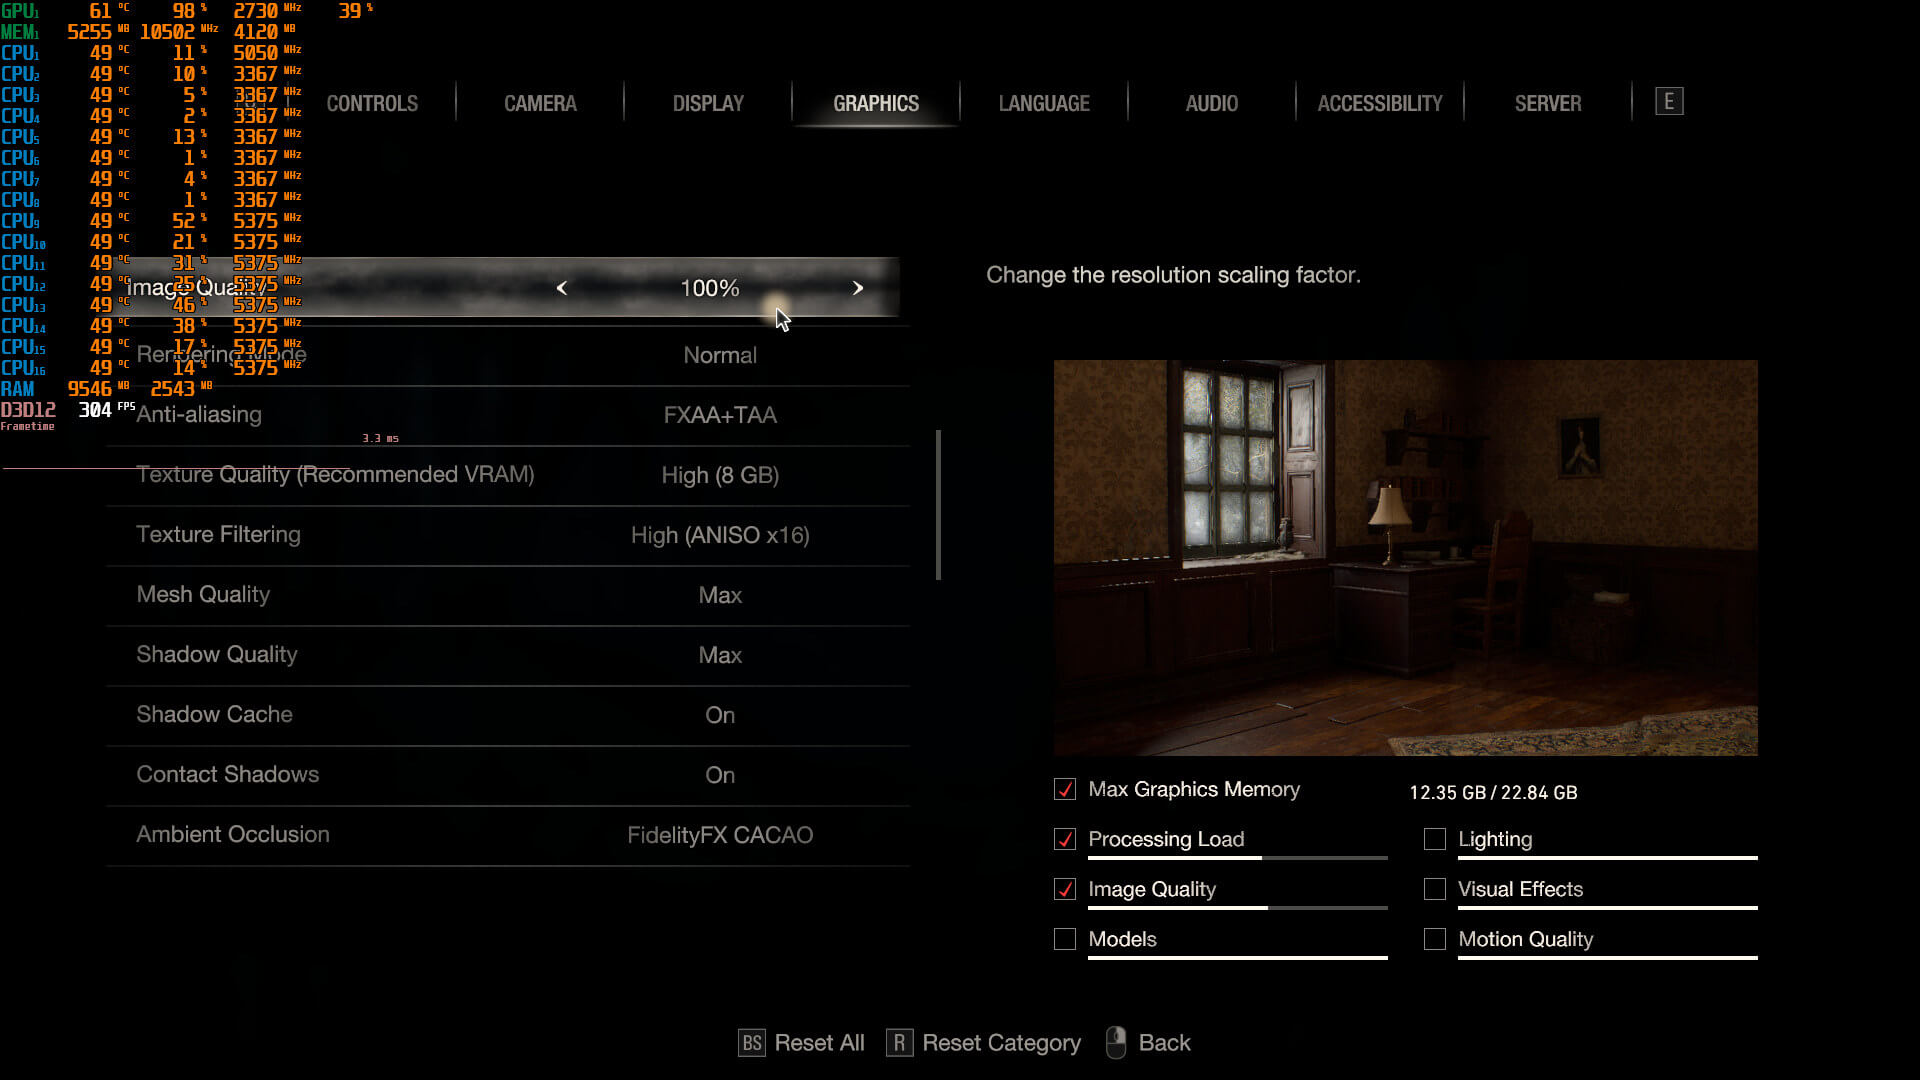 Resident Evil 4 remake: PC performance, system requirements and